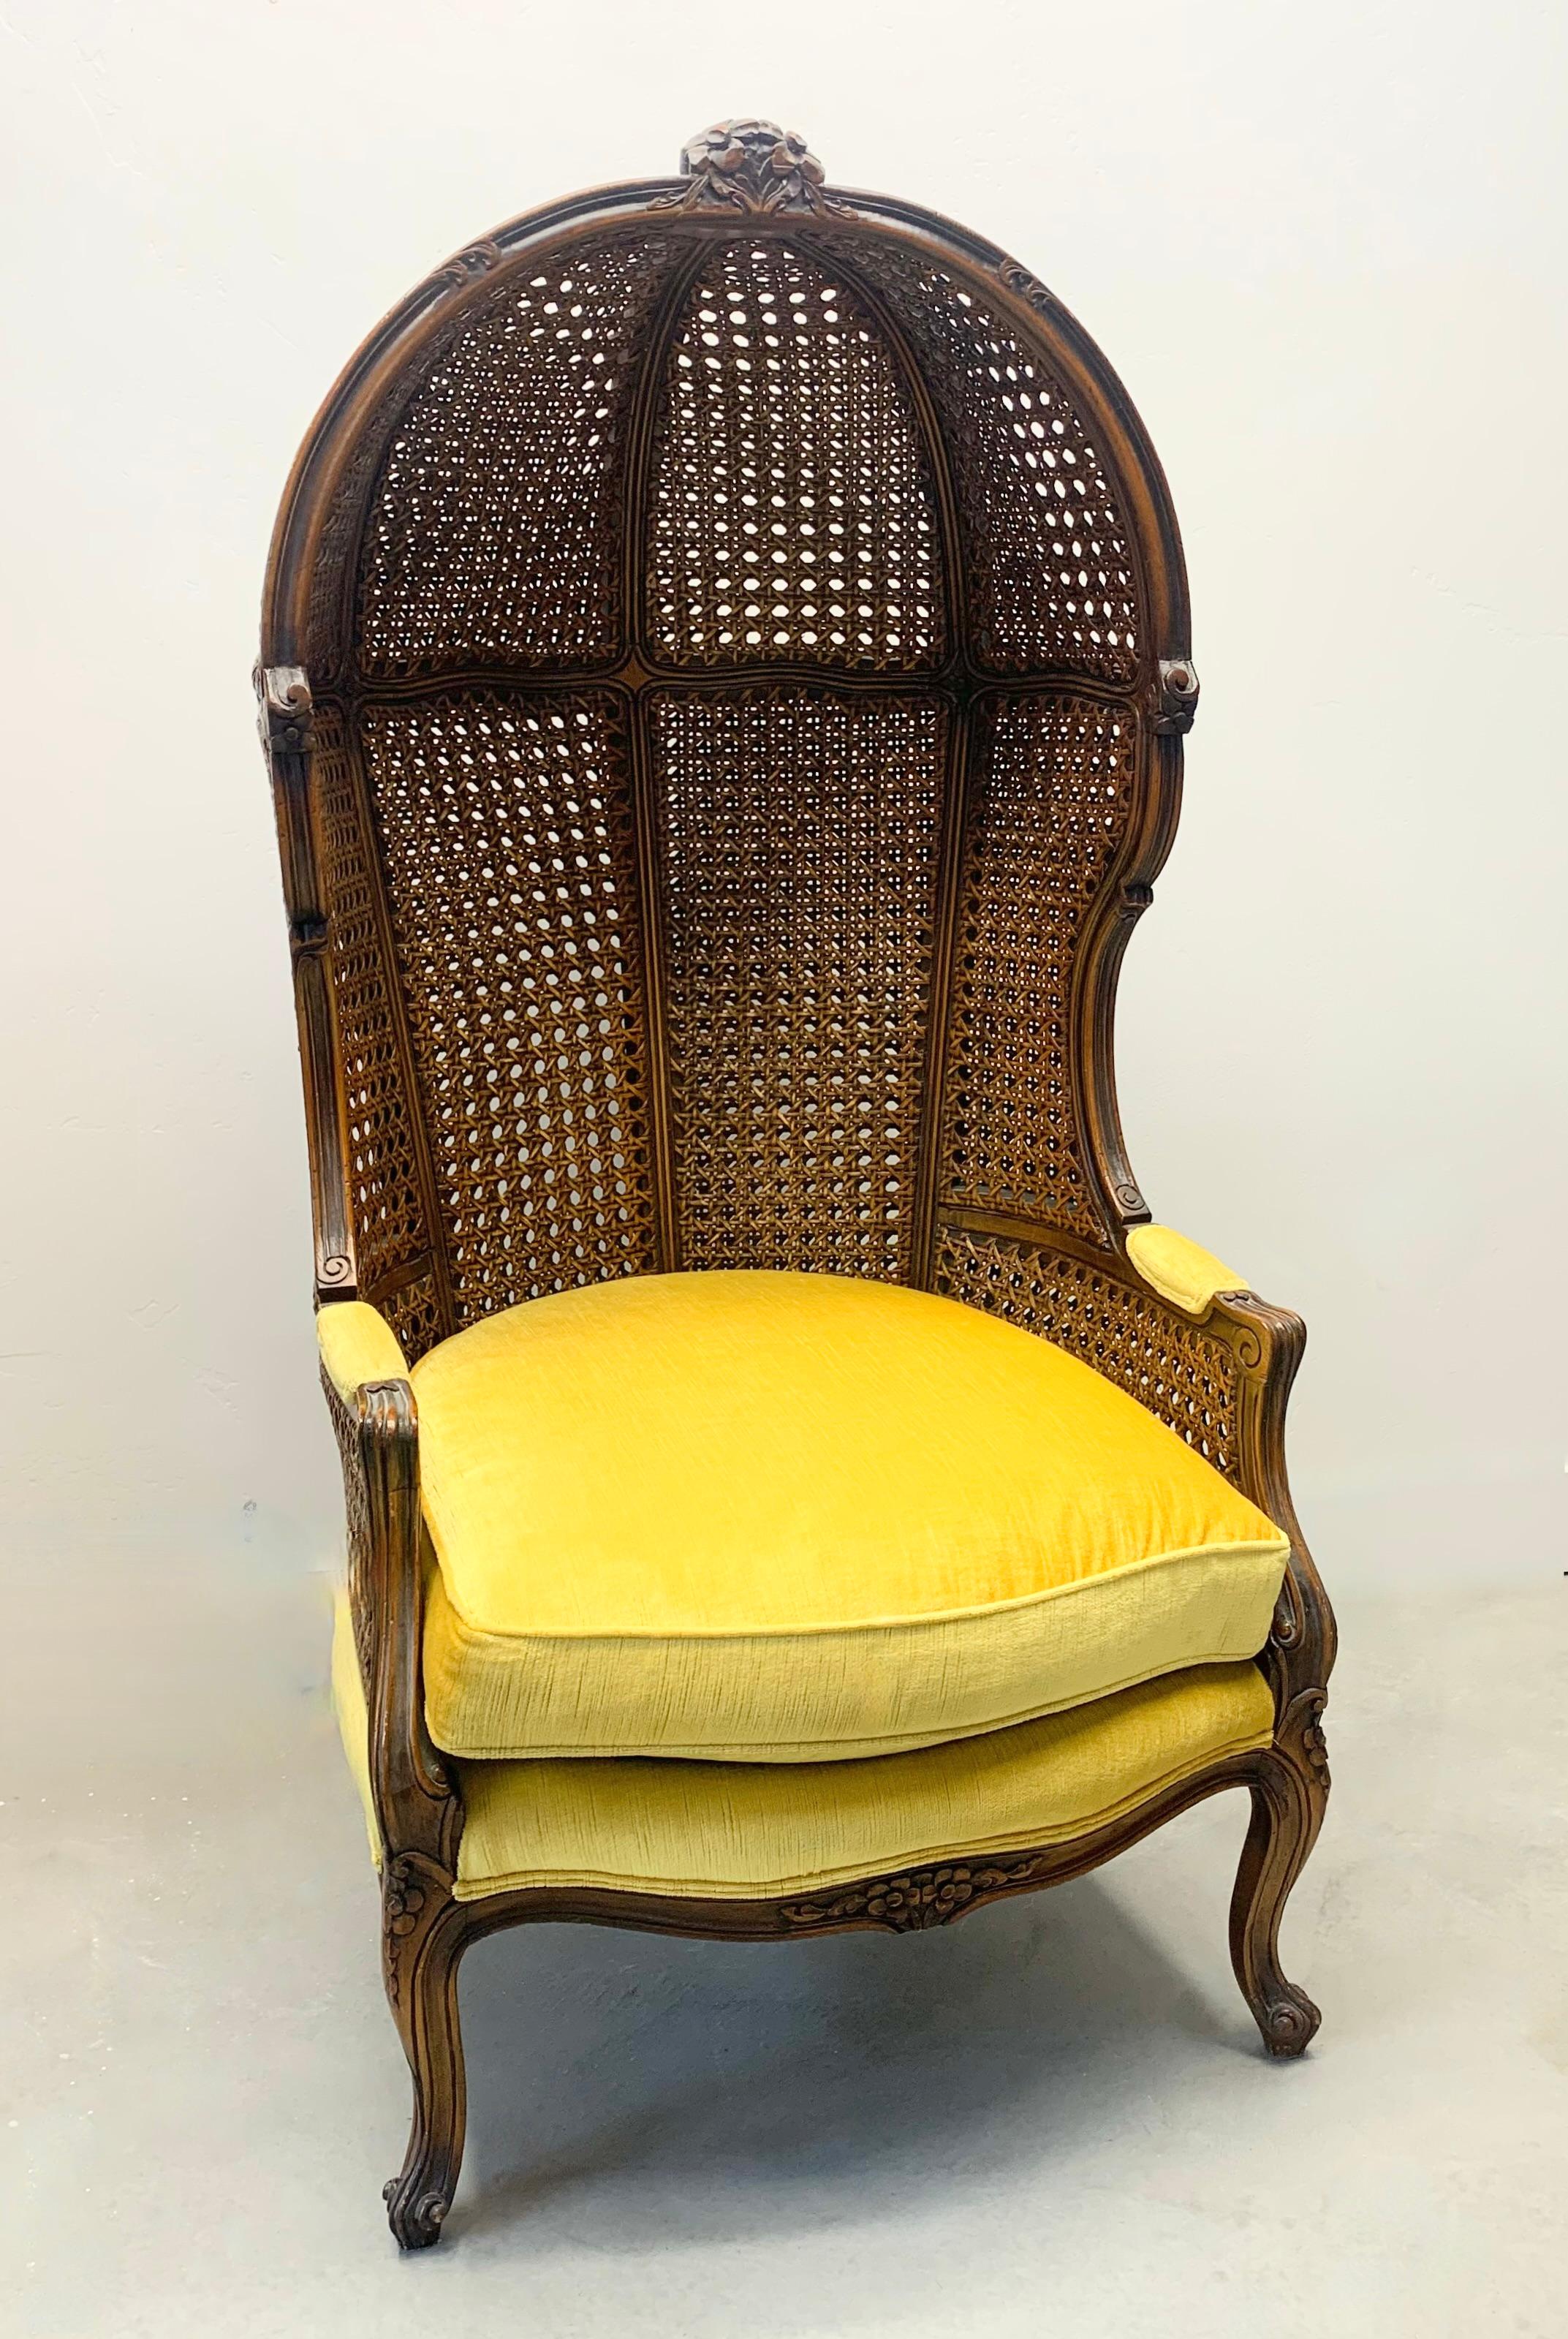 Vintage French Country Louis XV-style double cane Italian canopy porter's chair in excellent condition.  This beautiful grand chair features a double-caned solid walnut wood carved Italian frame, and vibrant, stunning, and flawless, canary-yellow